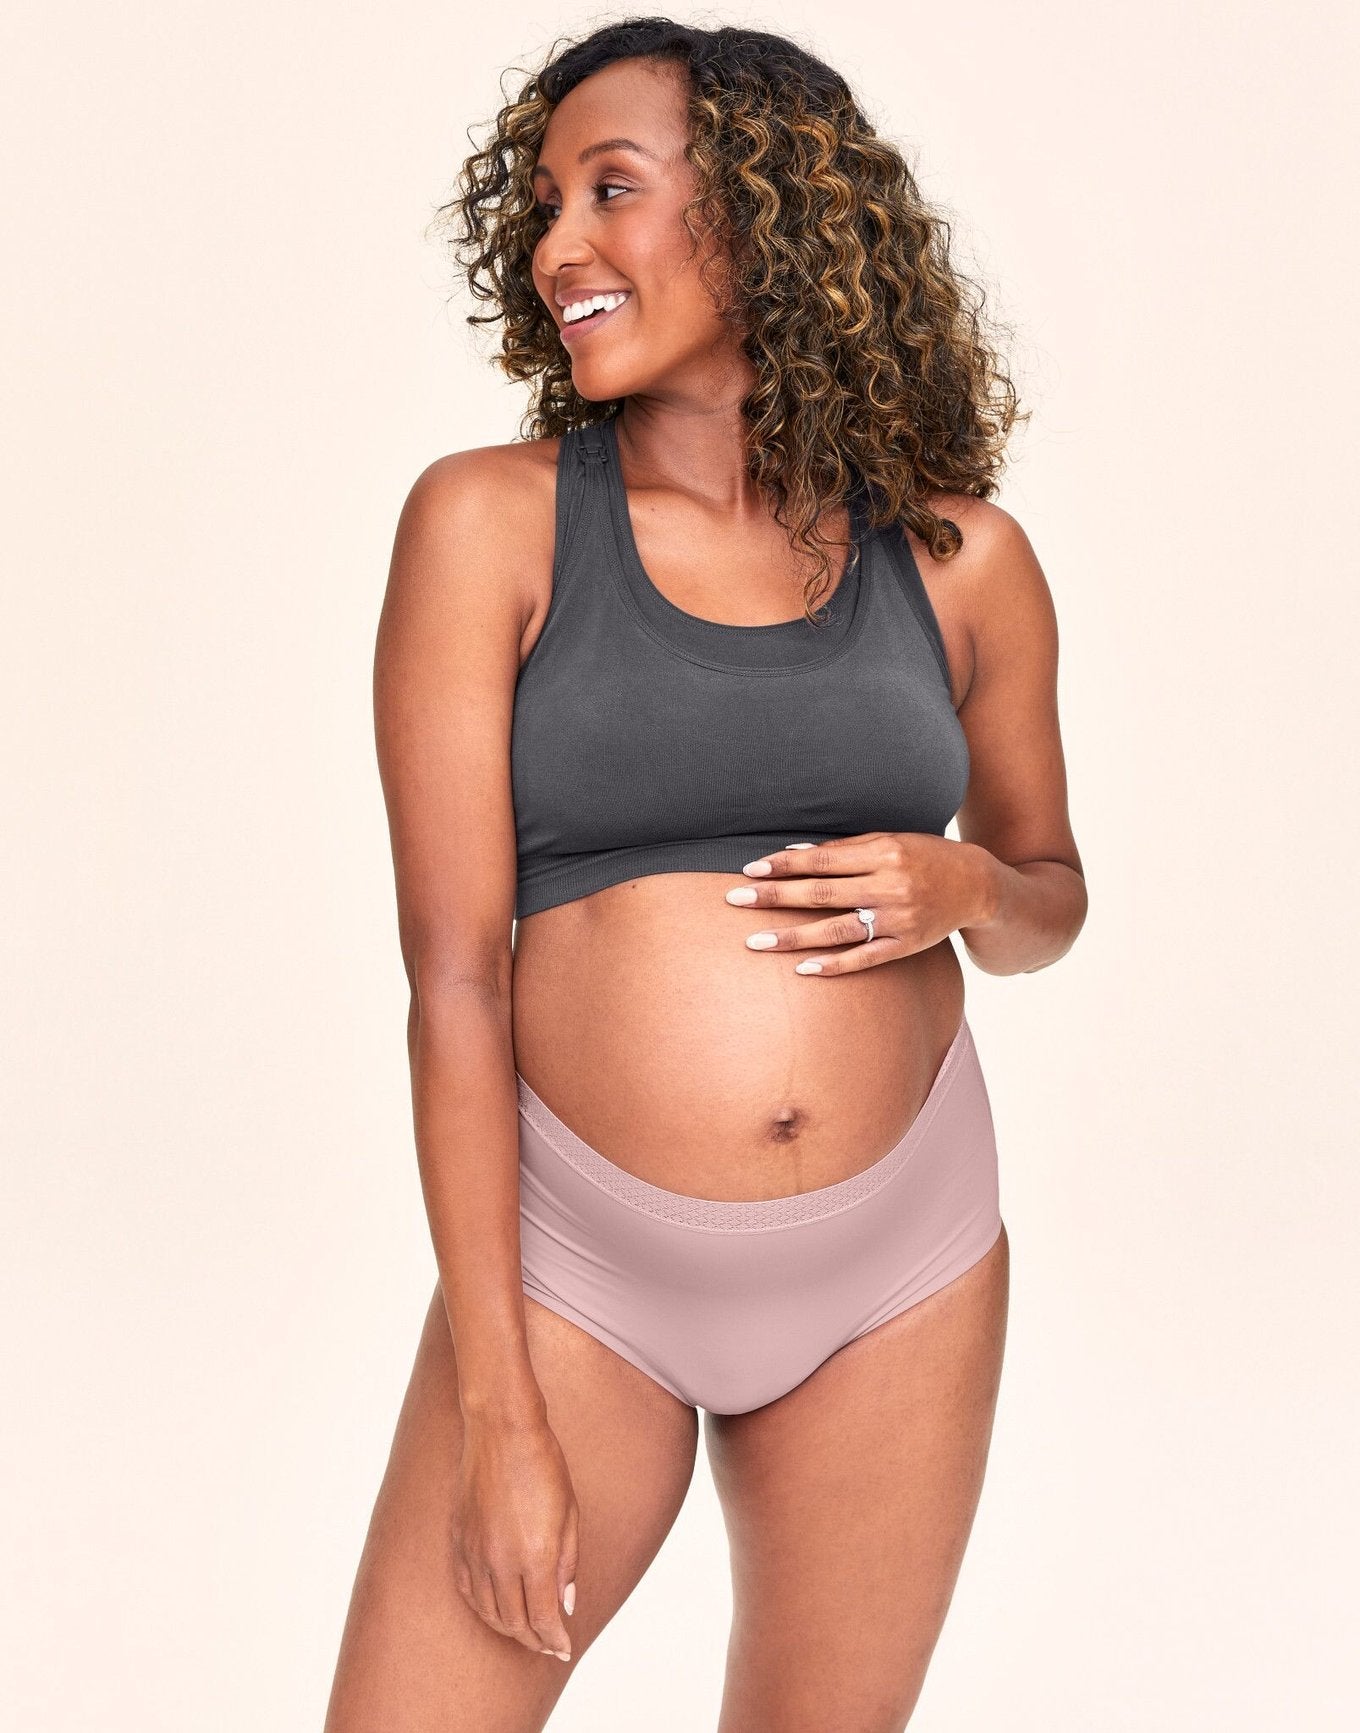 Belabumbum Mama Smoothing Brief Maternity & Postpartum  Absorbent Panty in color Pale Mauve and shape high waisted